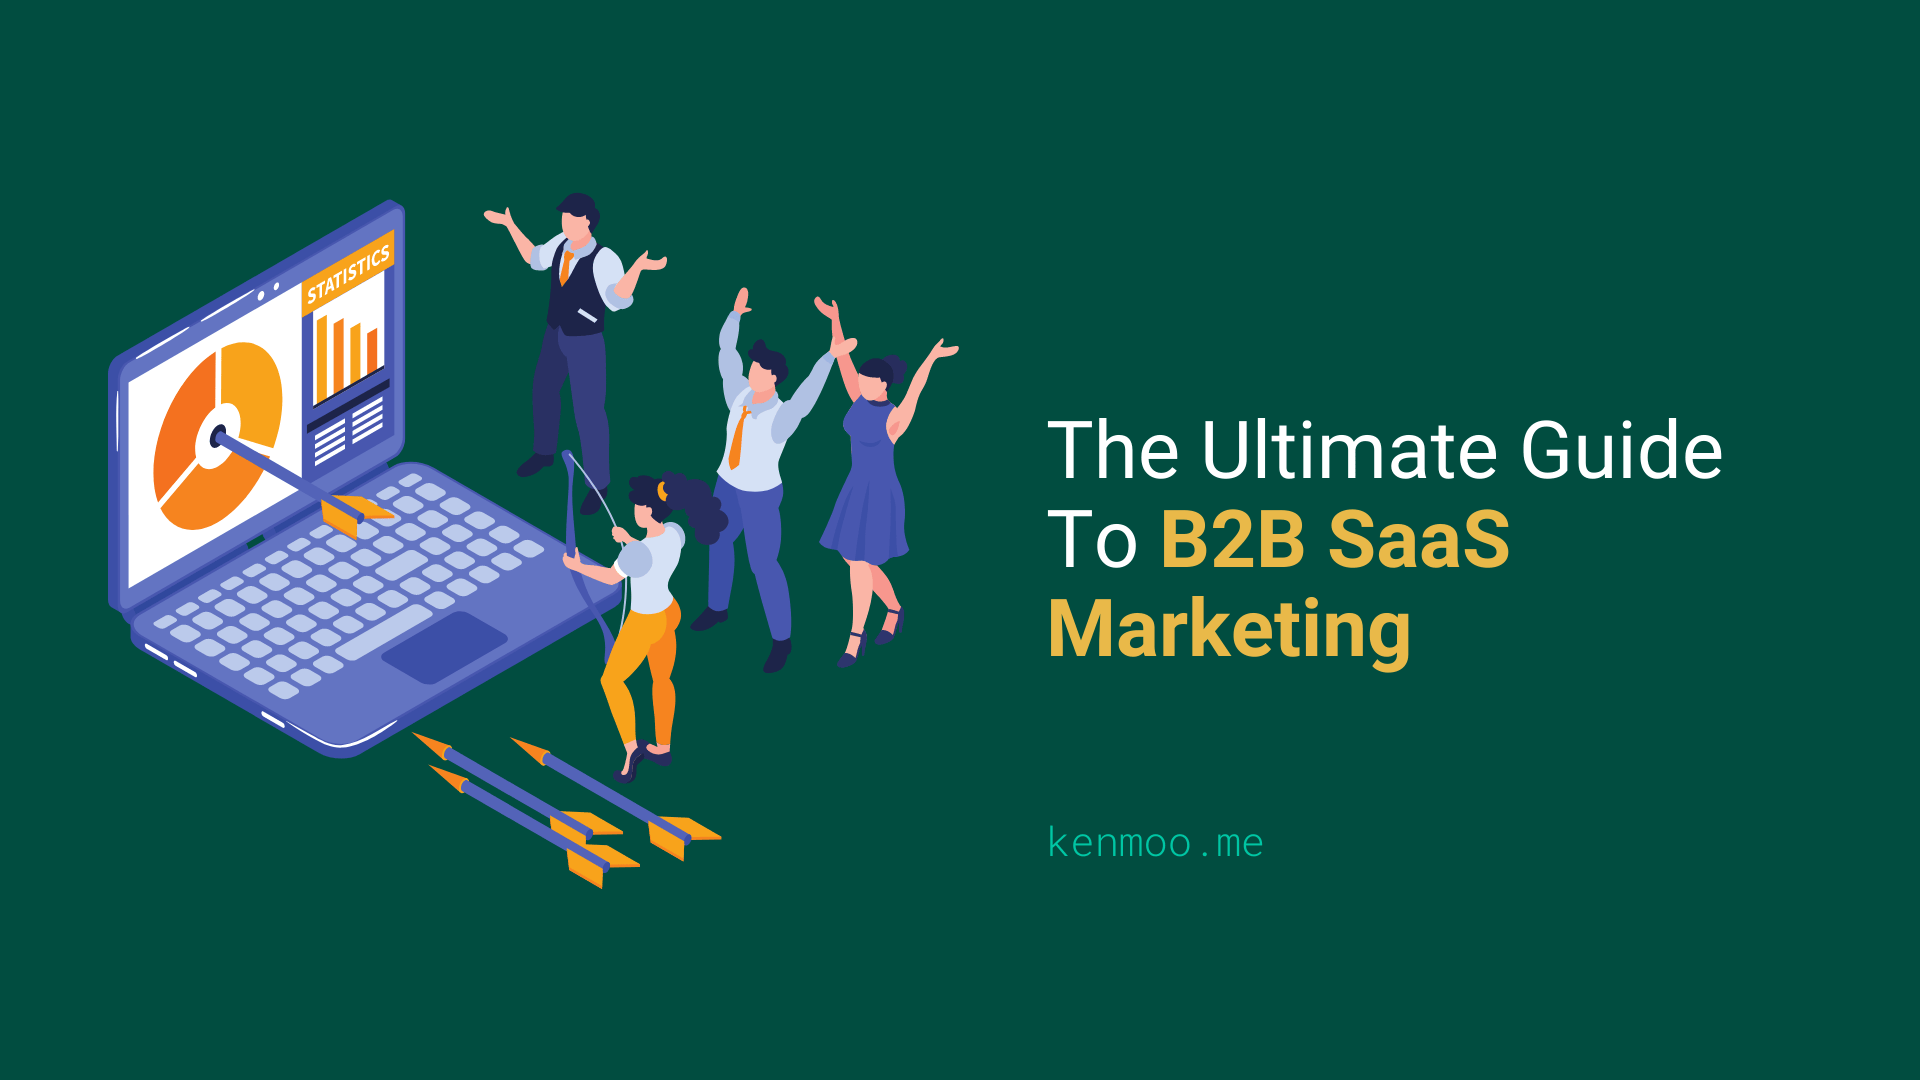 The Ultimate Guide To B2B SaaS Marketing